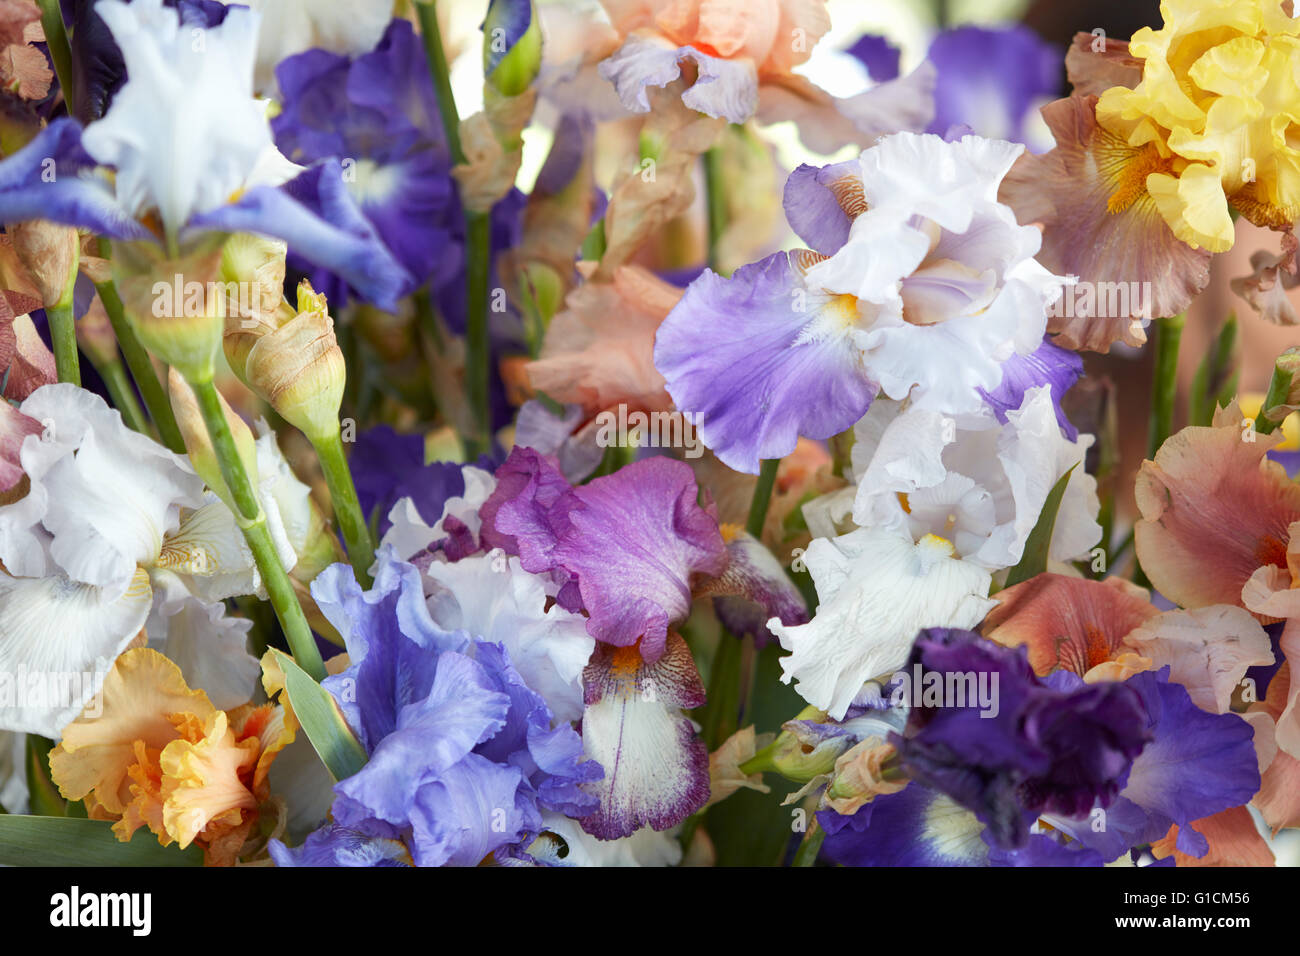 Iris flowers in blue, purple, yellow colors background Stock Photo